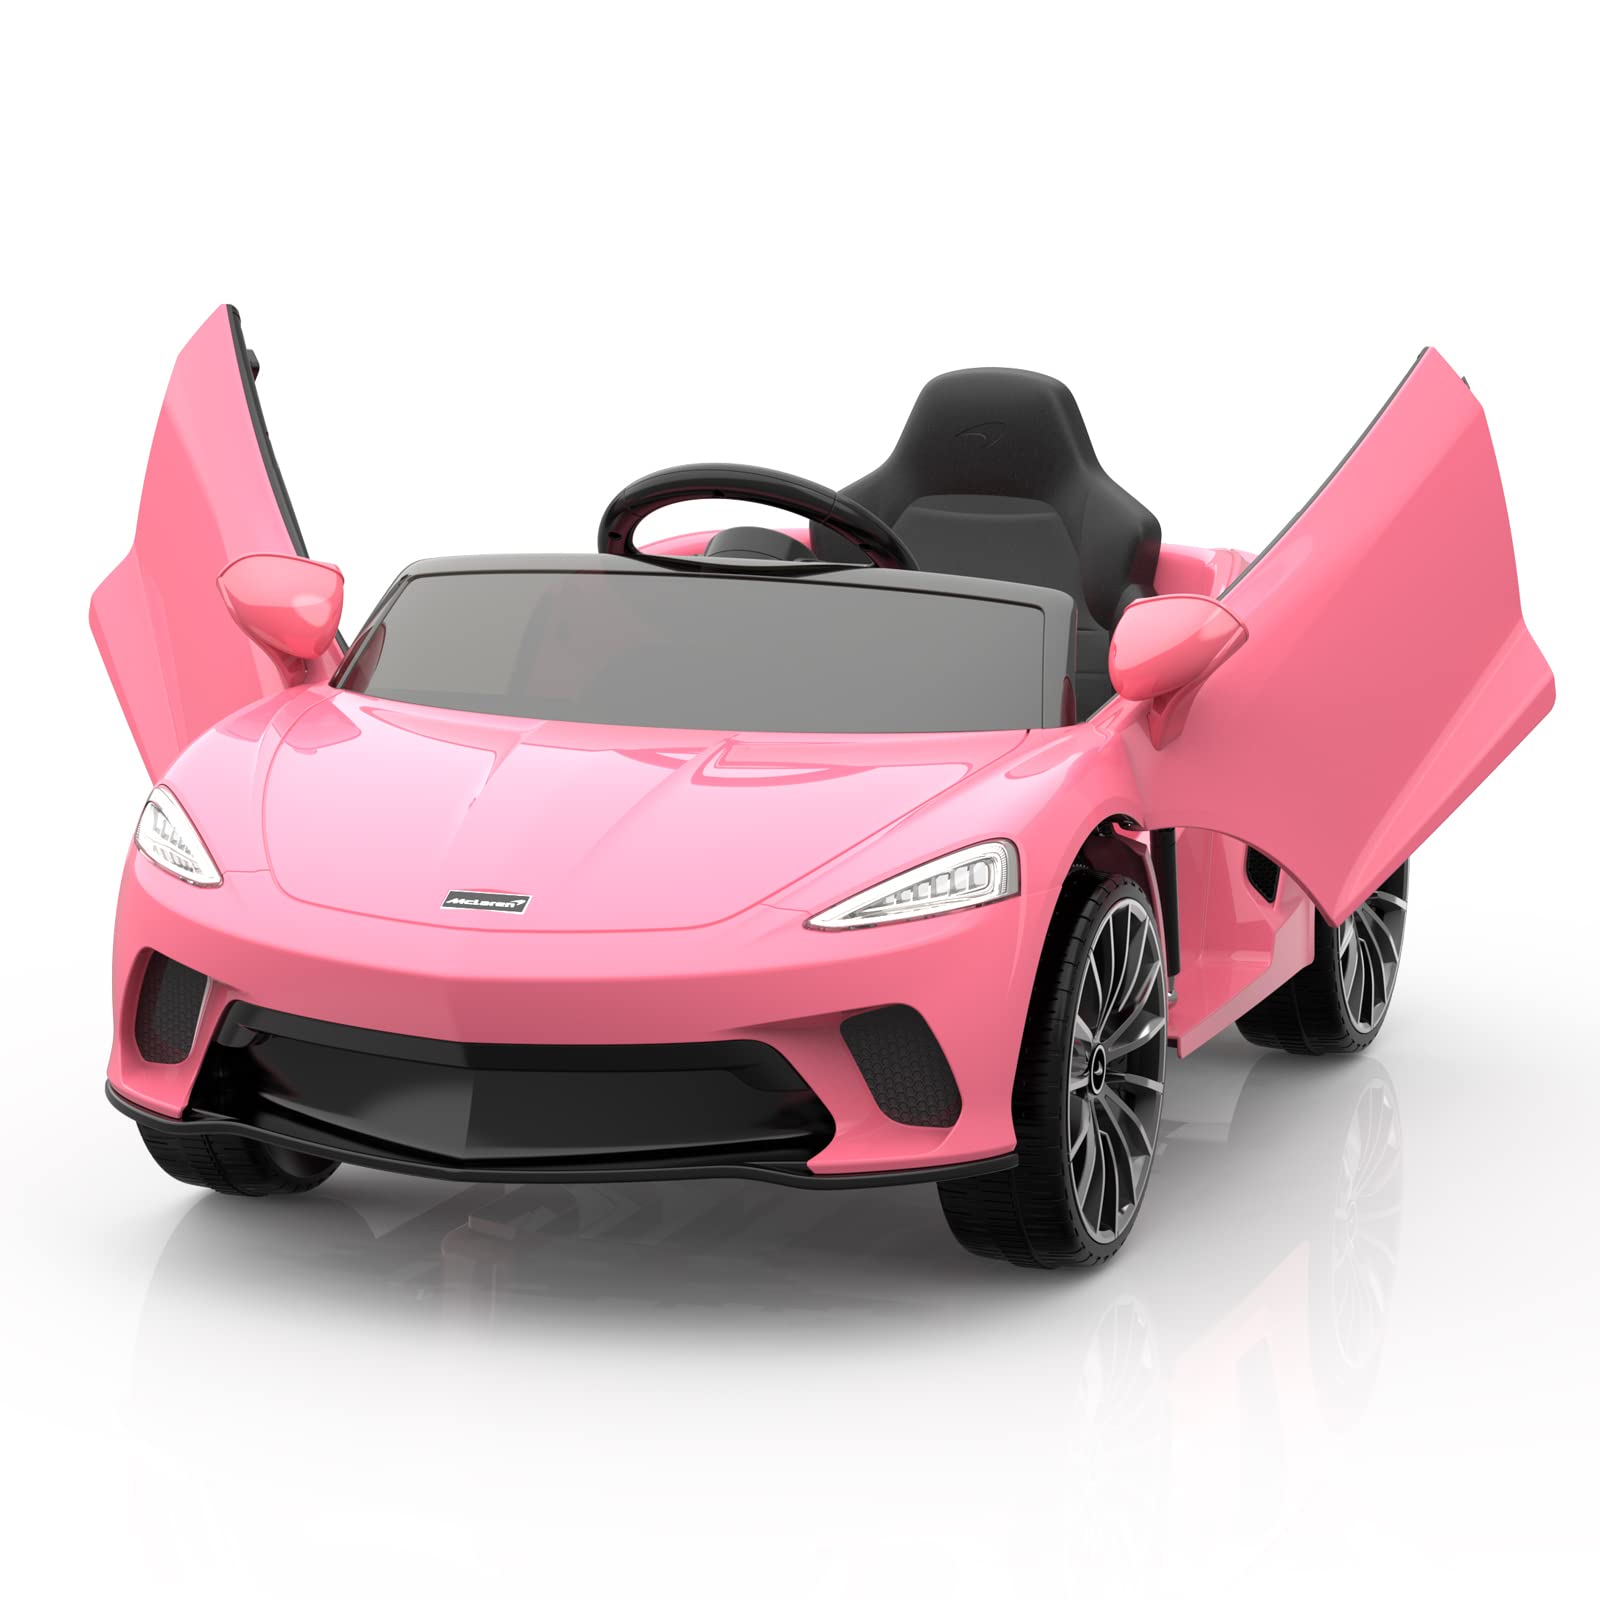 Hetoy Ride on Car for Kids 12V Licensed McLaren Battery Powered Sports Car with 2 Speeds, Parent Control, Sound System, LED Headlights and Hydraulic Doors (Pink)